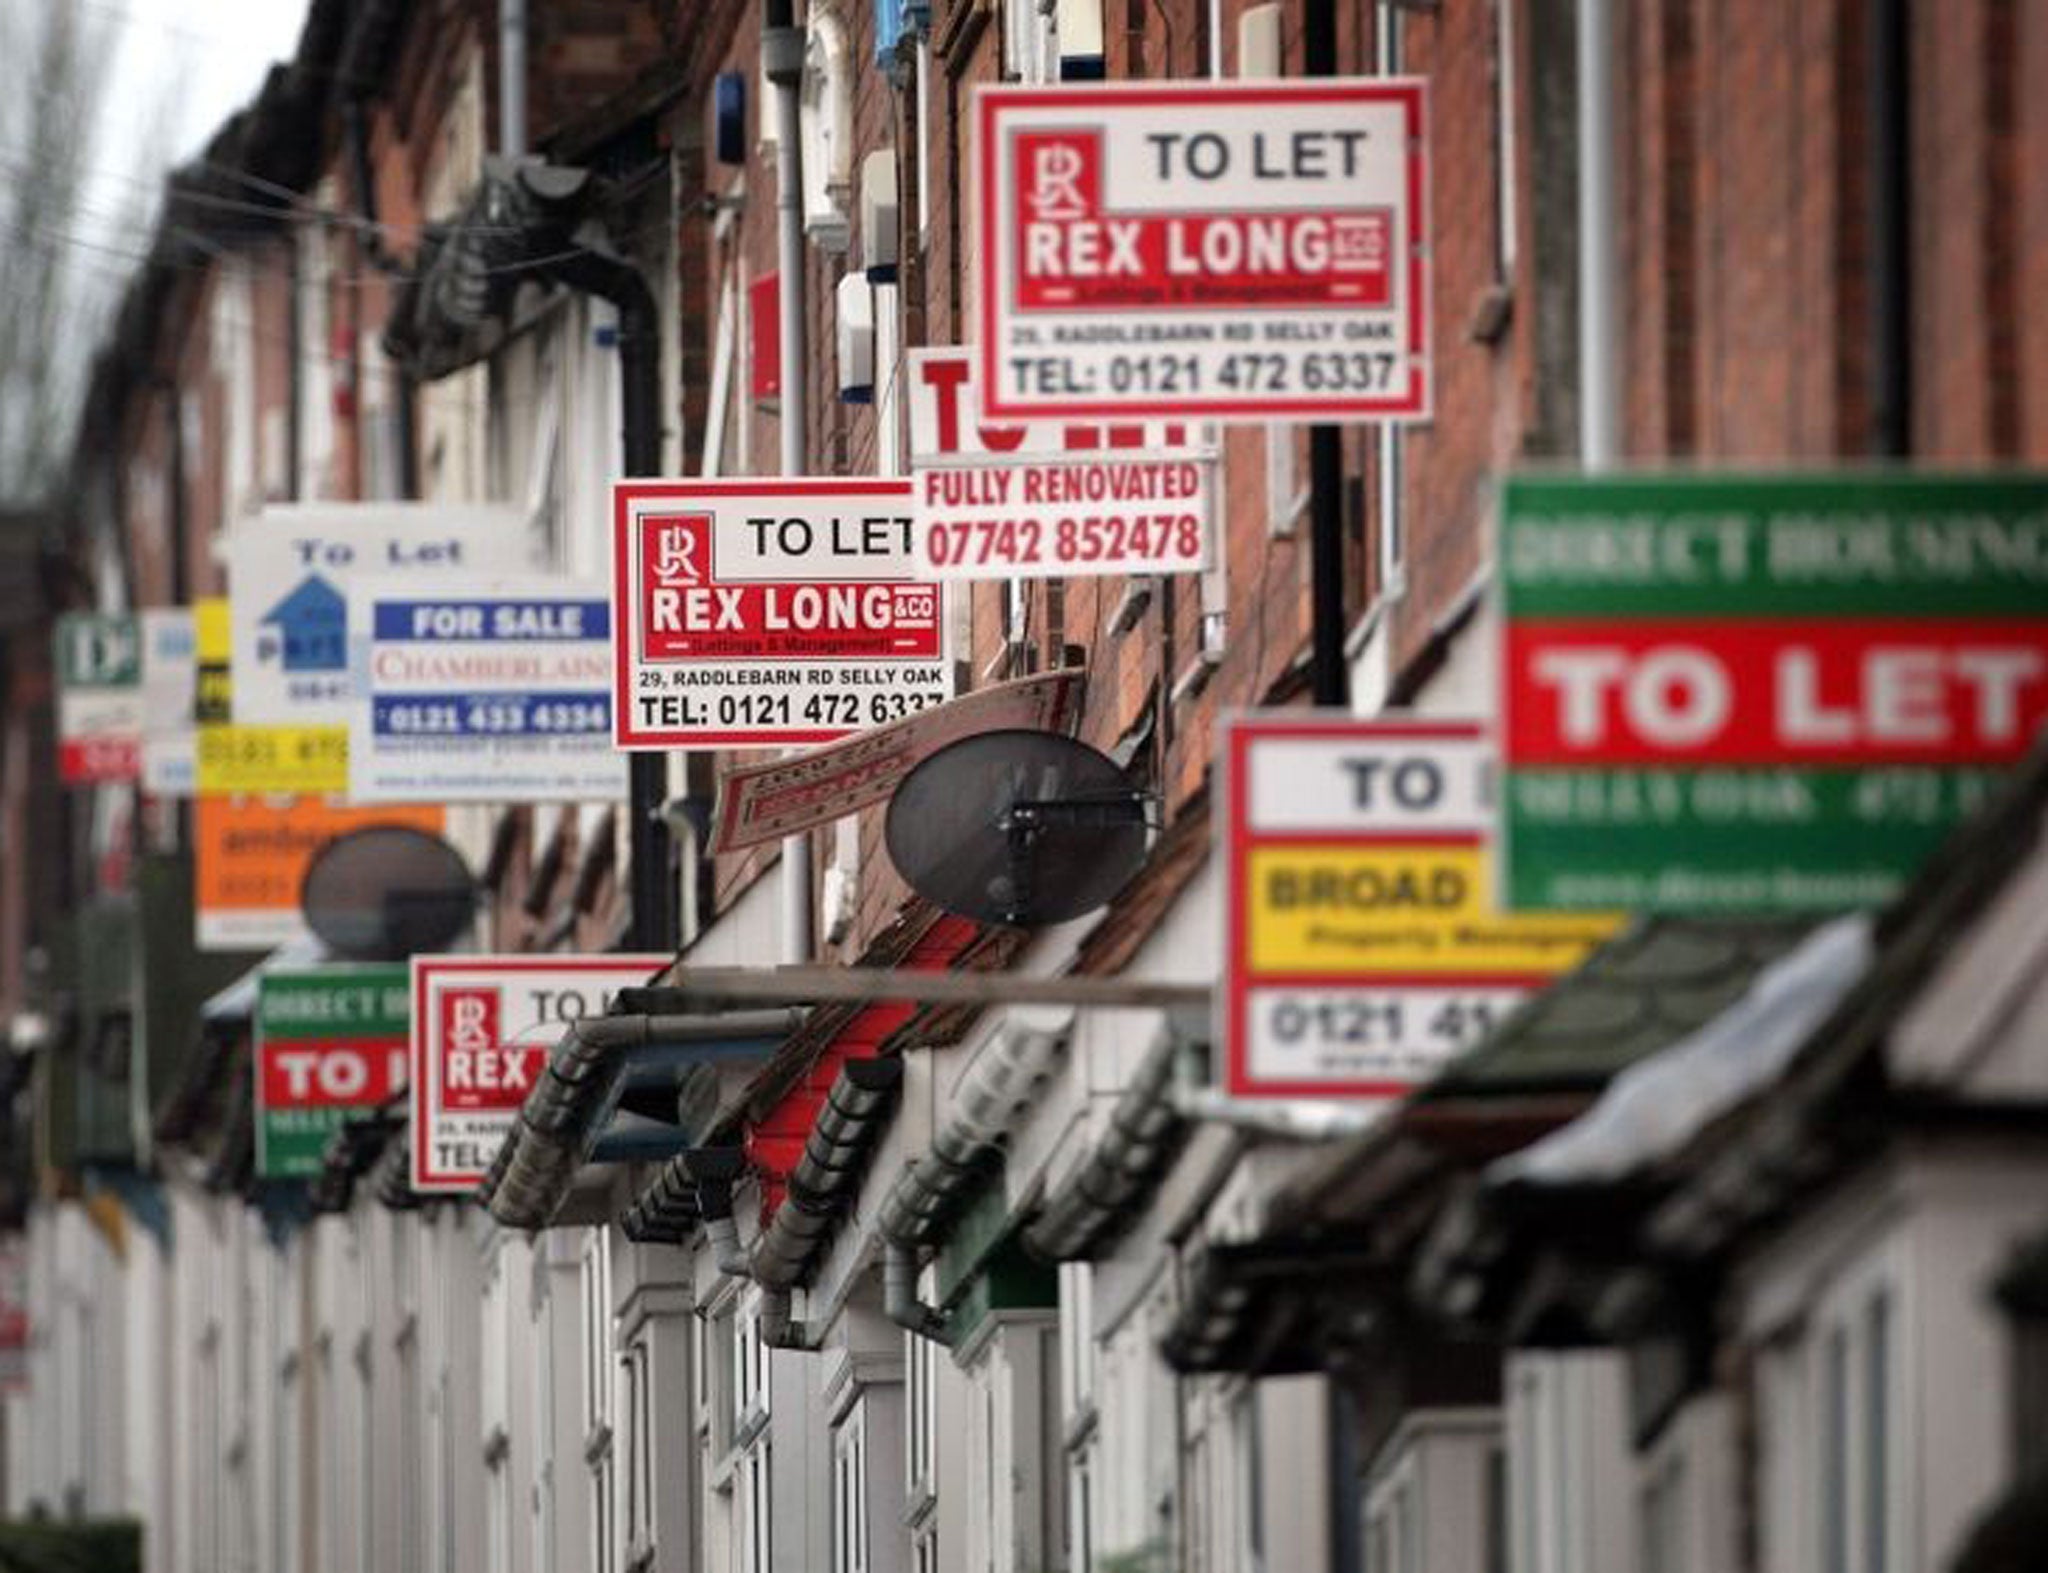 Landlords quids in: There is no shortage of property to rent, but it can come at a high price